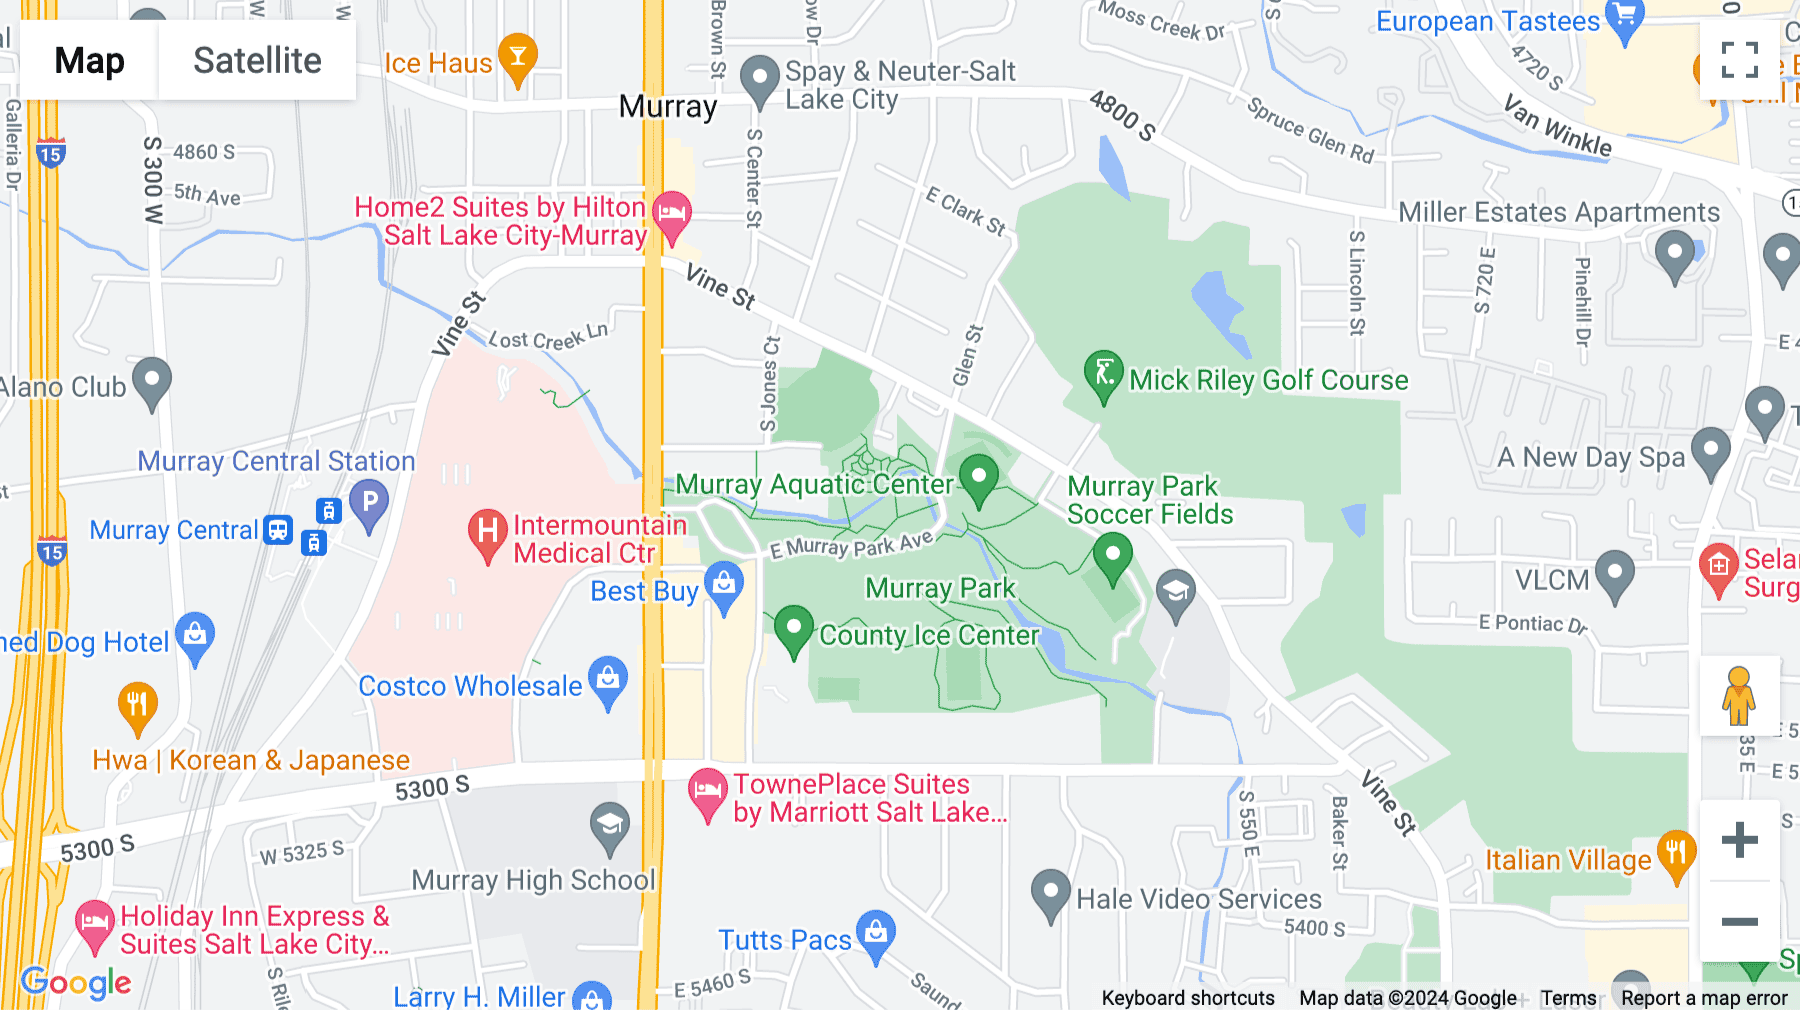 Click for interative map of Woodlands Business Park, 4021 South 700 East, Salt Lake City